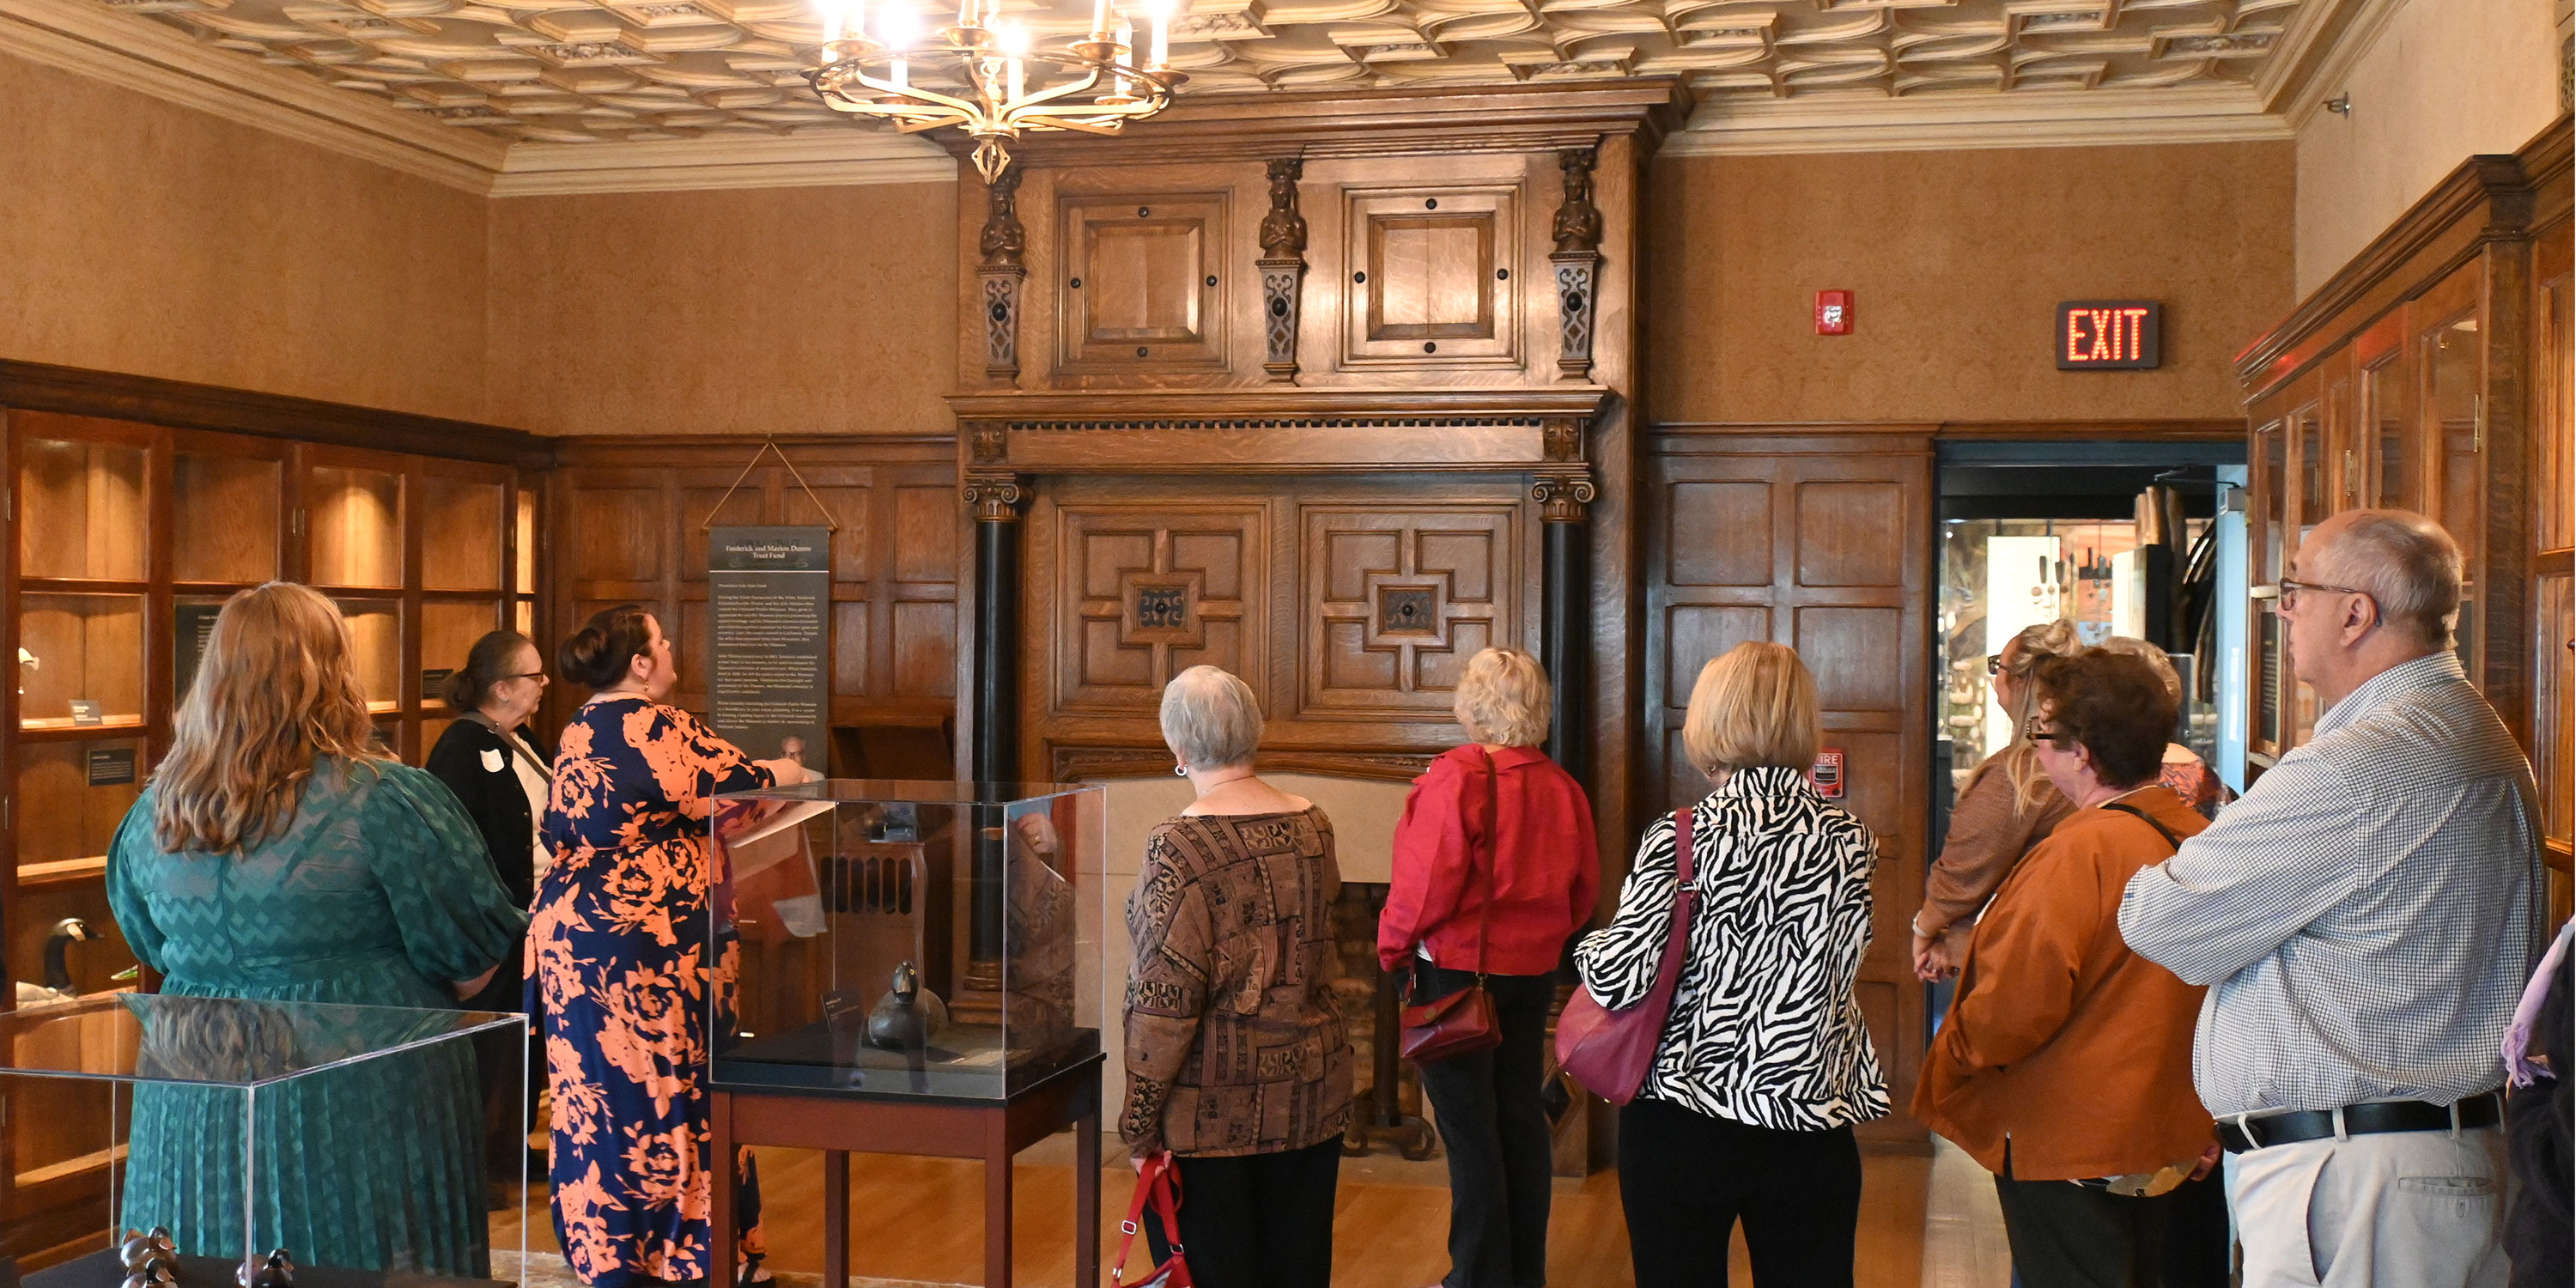 Event held in the Historic Sawyer Home library